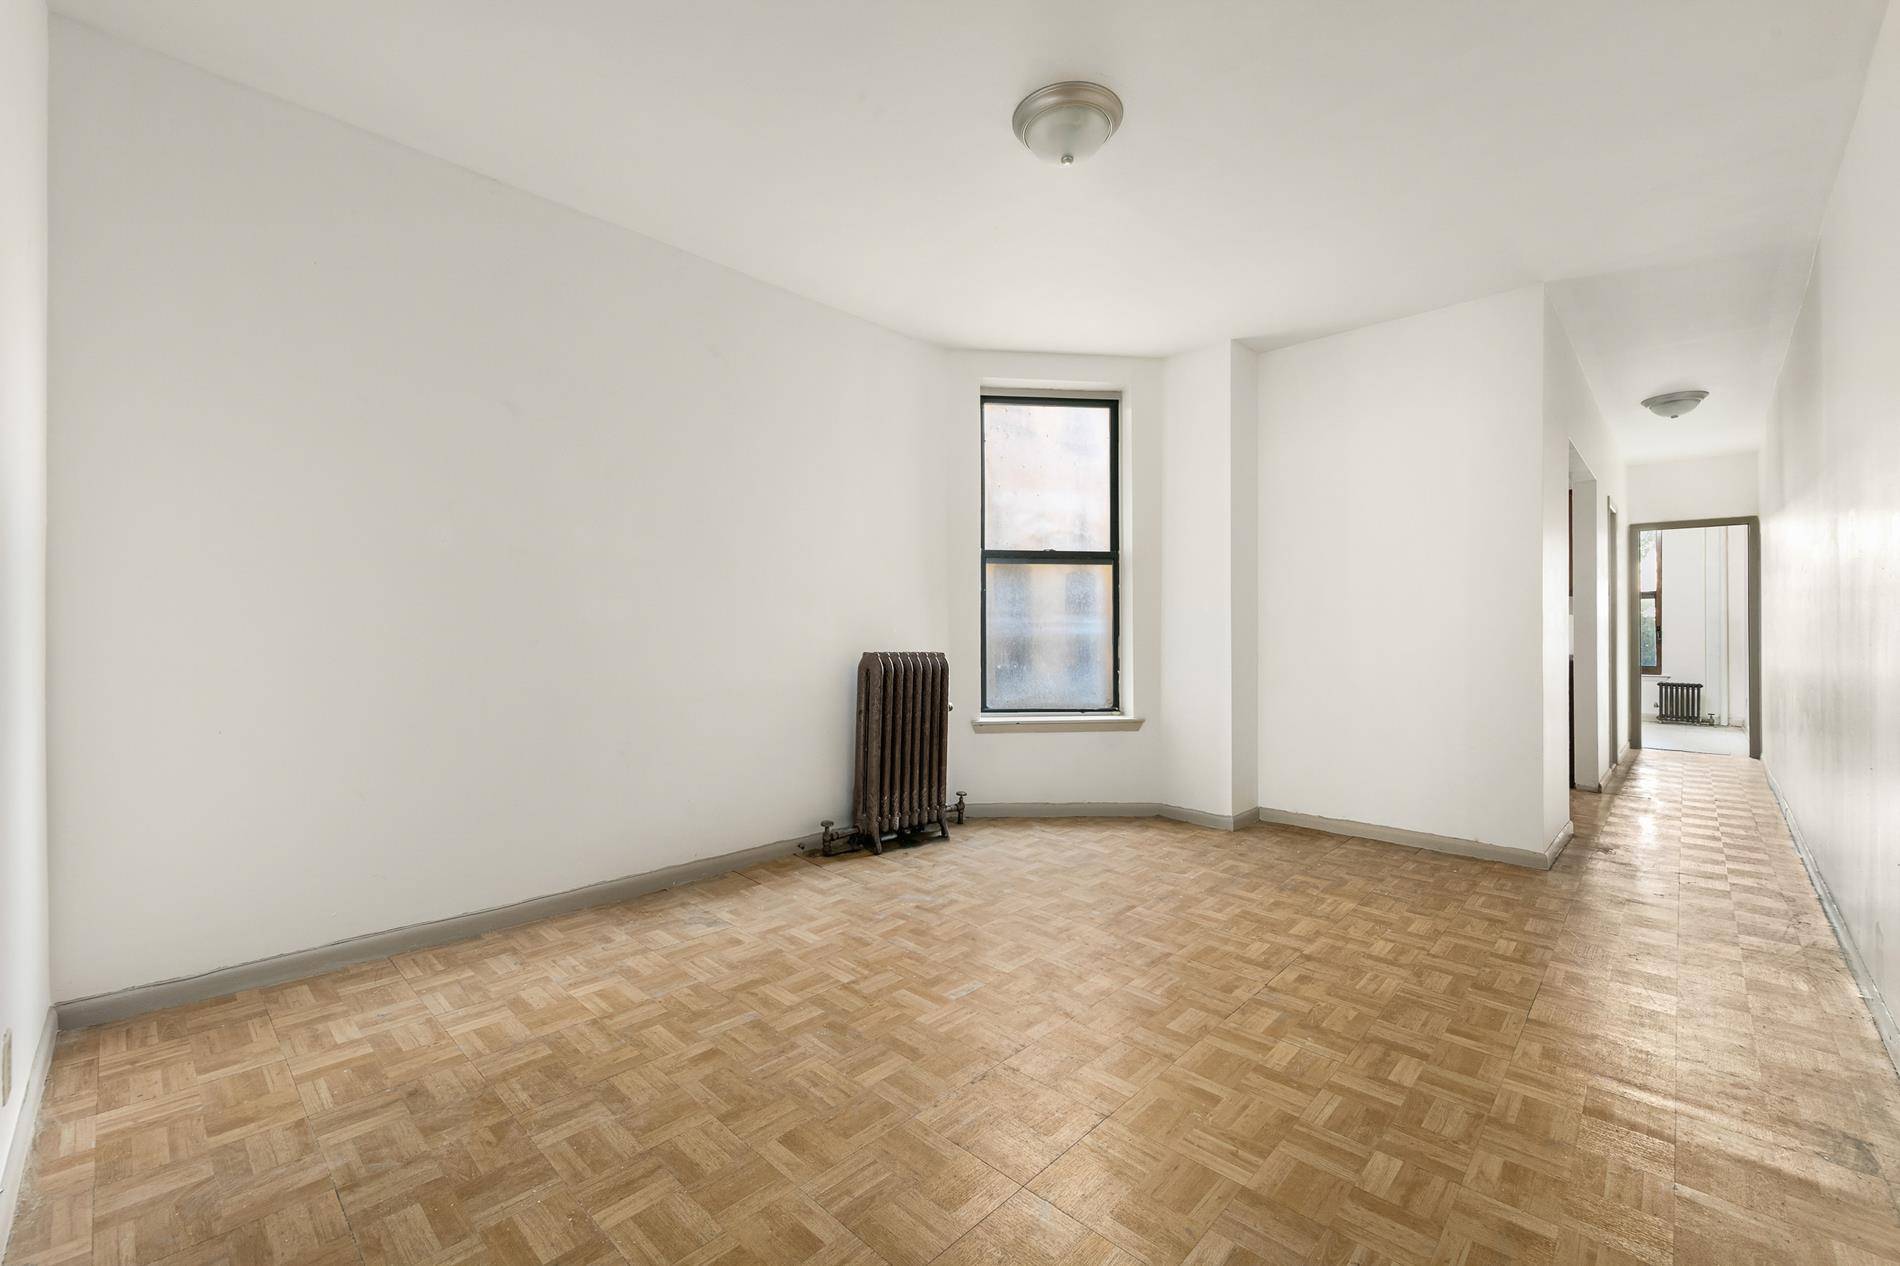 Welcome home to 151 west 106th apartment 4A, a split 2 bedroom apartment in Manhattan Valley in NYC s Upper West Side.